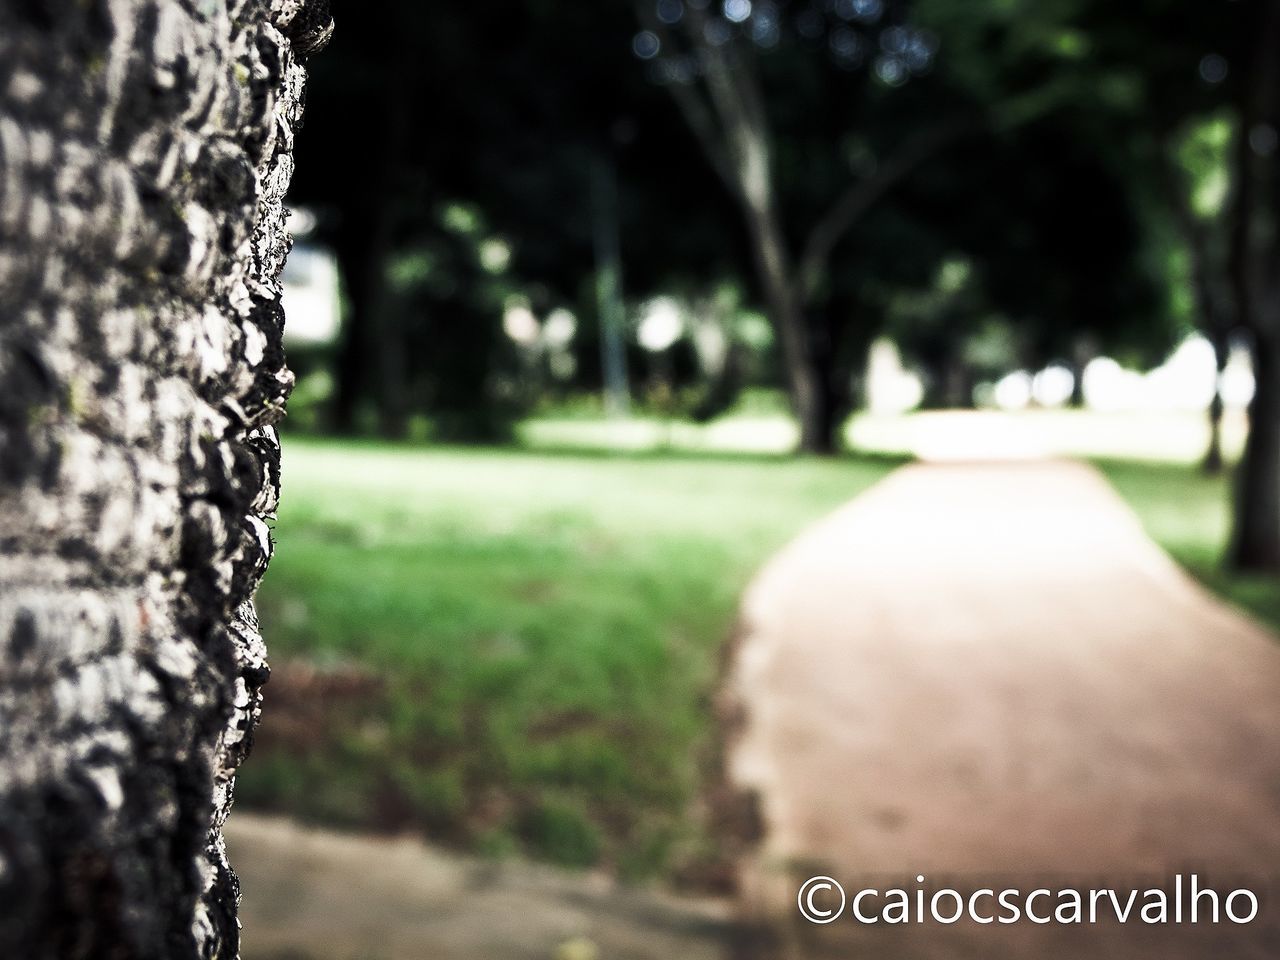 tree, focus on foreground, selective focus, close-up, text, tree trunk, nature, outdoors, day, tranquility, park - man made space, communication, western script, growth, no people, forest, the way forward, road, street, surface level